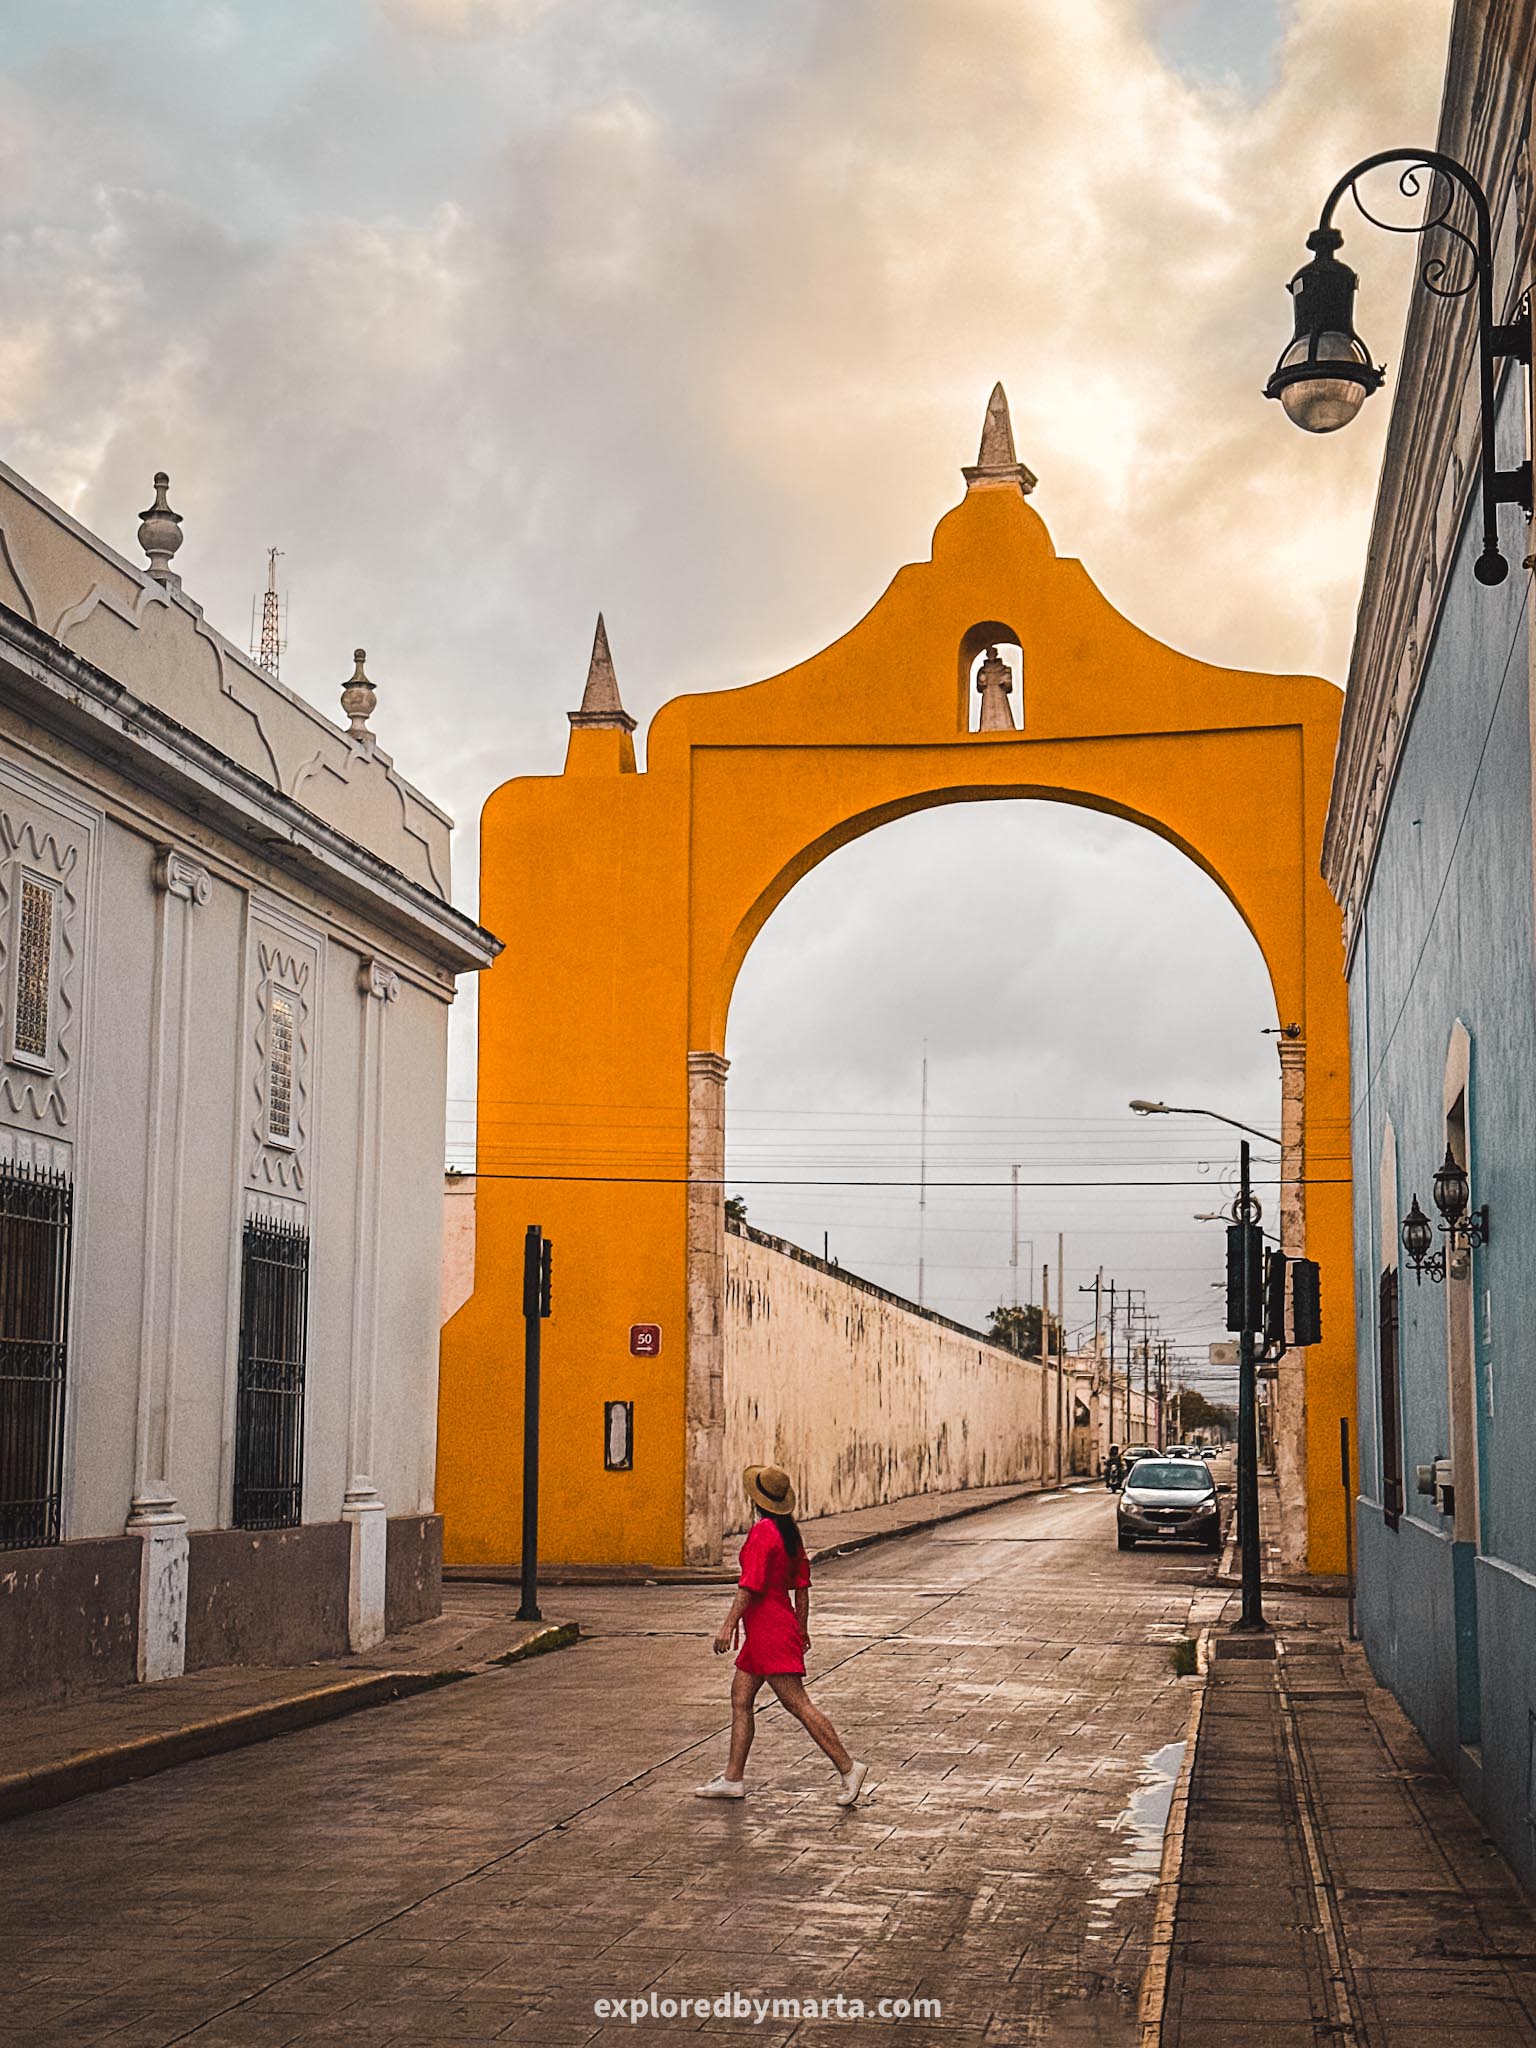 Merida, Mexico-Arco de Dragones yellow colonial arch stretching over a street in Merida, Mexico